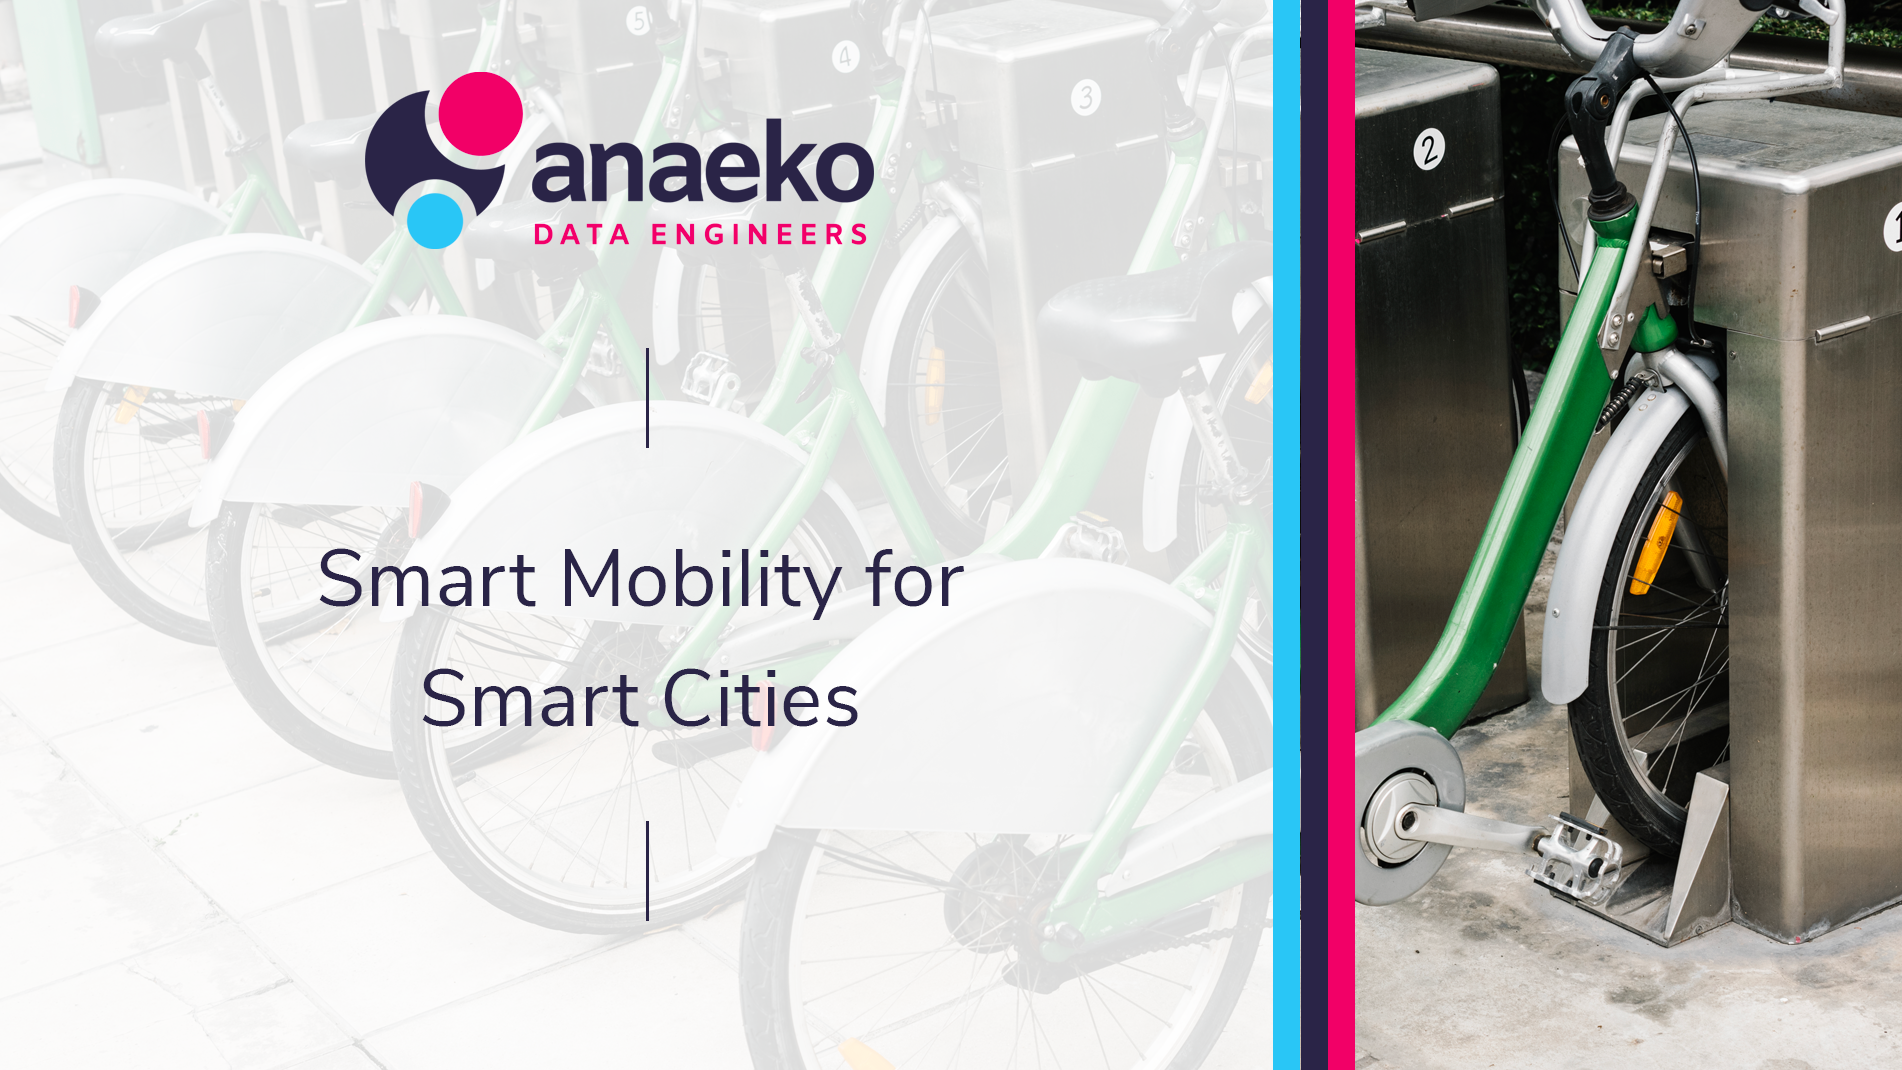 smart-mobility-for-smart-cities-anaeko-data-engineers